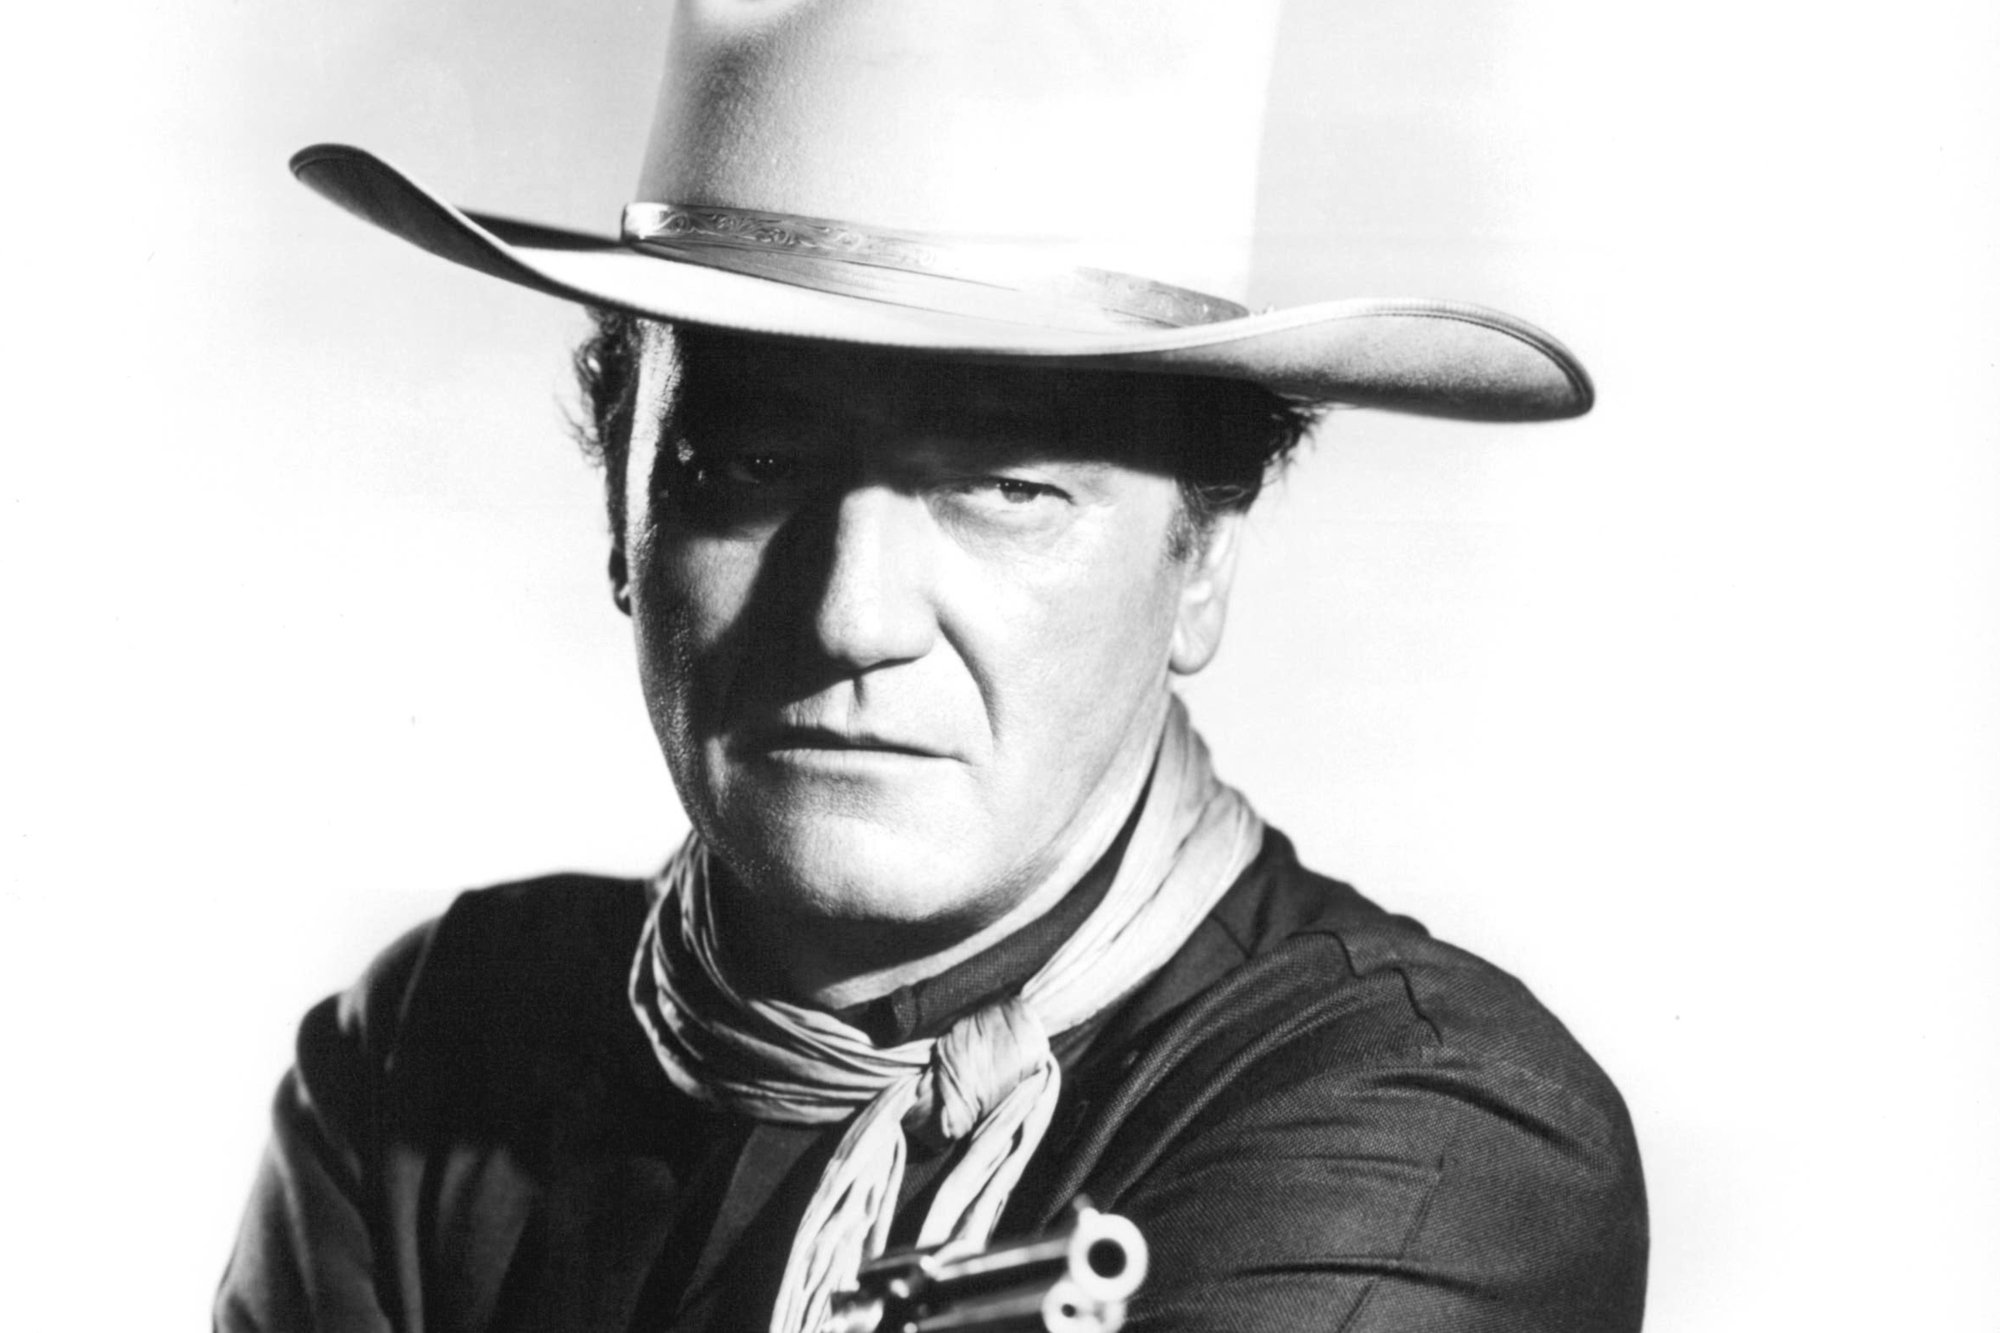 'The Man Who Shot Liberty Valance' actor John Wayne, who 'Family Guy' teased. He's wearing a cowboy hat and holding a gun in a black-and-white picture.